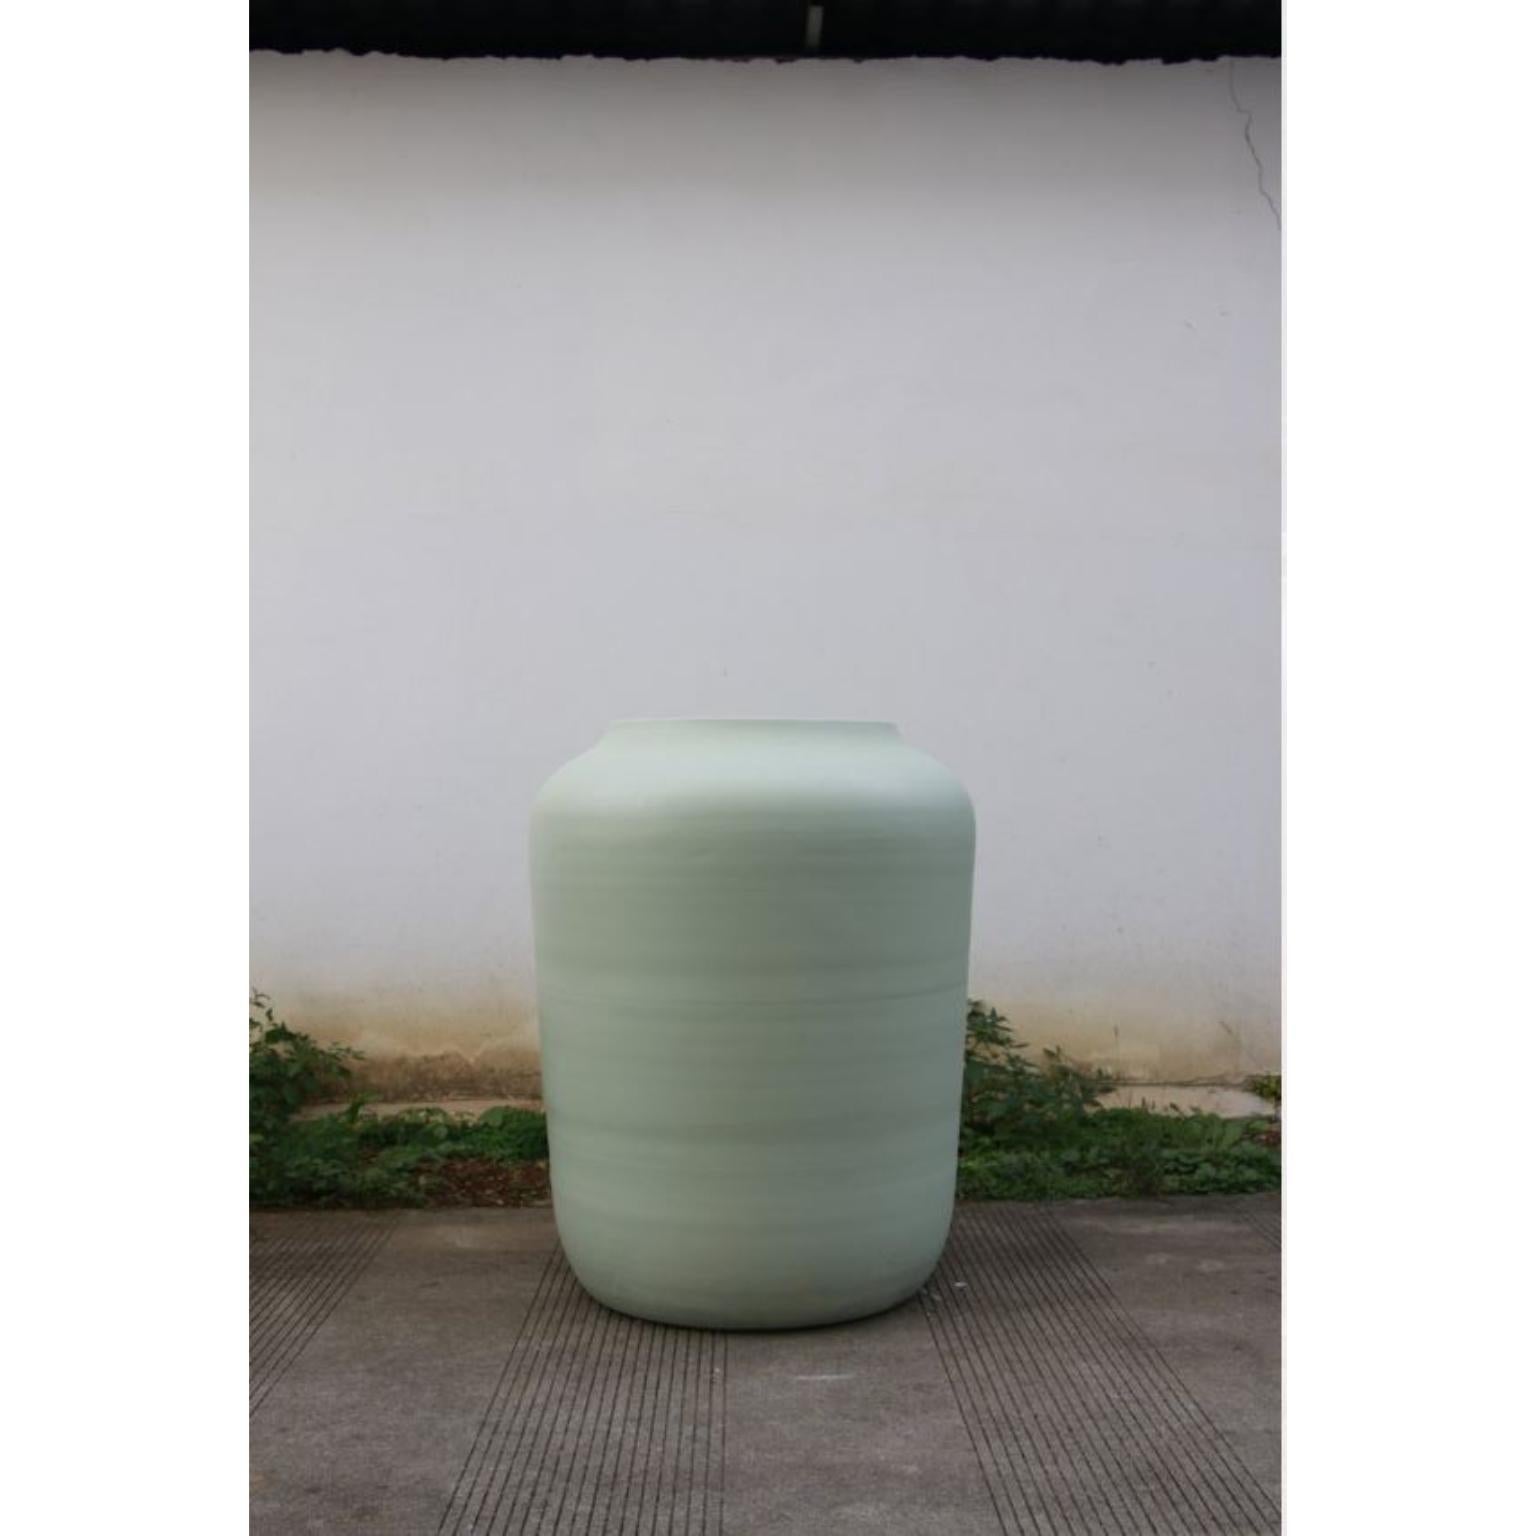 Dialogue Planters M by WL Ceramics
Designer: Lex Pott
Materials: Porcelain
Dimensions: H110 x Ø85 cm

According to Lex Pott, working on this family of planters has been a fascinating process of diving into the ancient craft of wheel throwing. His